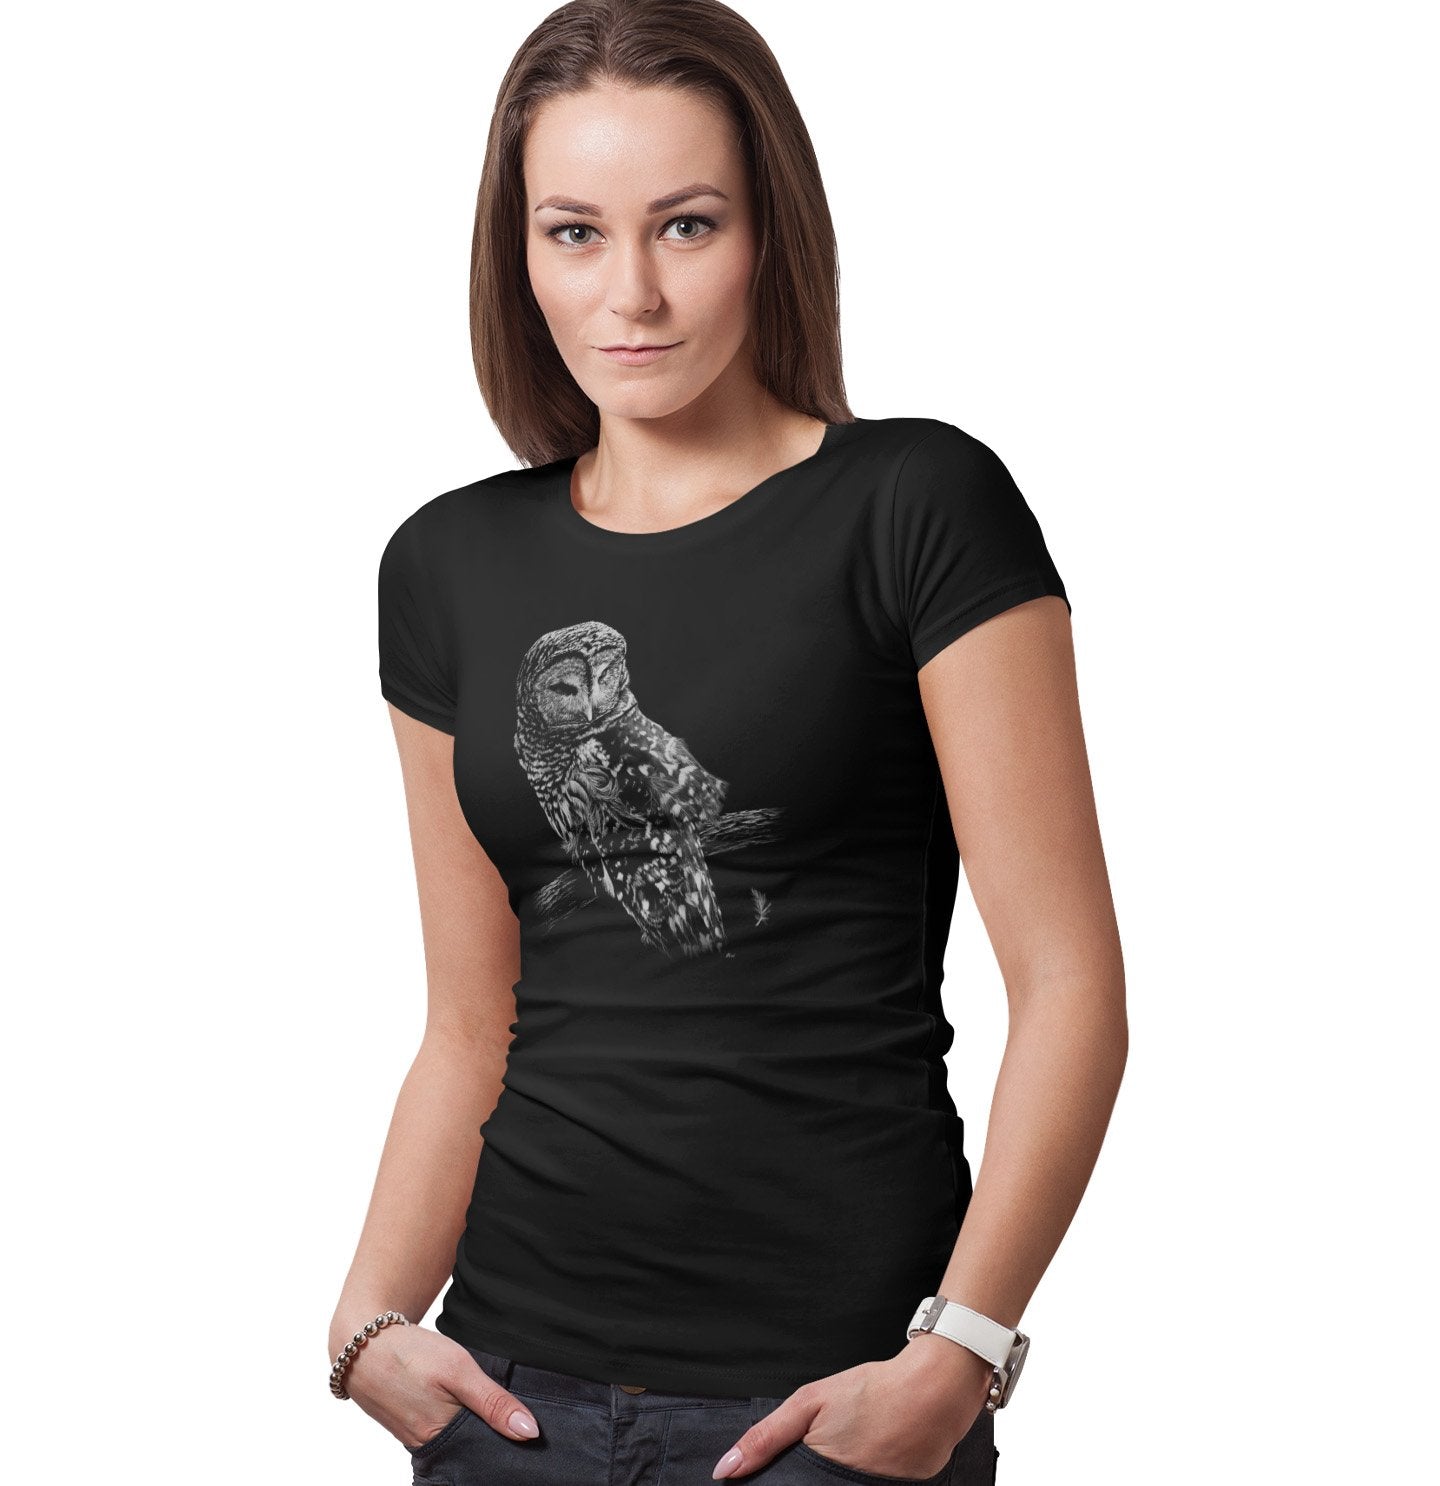 Barred Owl on Black - Women's Fitted T-Shirt - Animal Tee